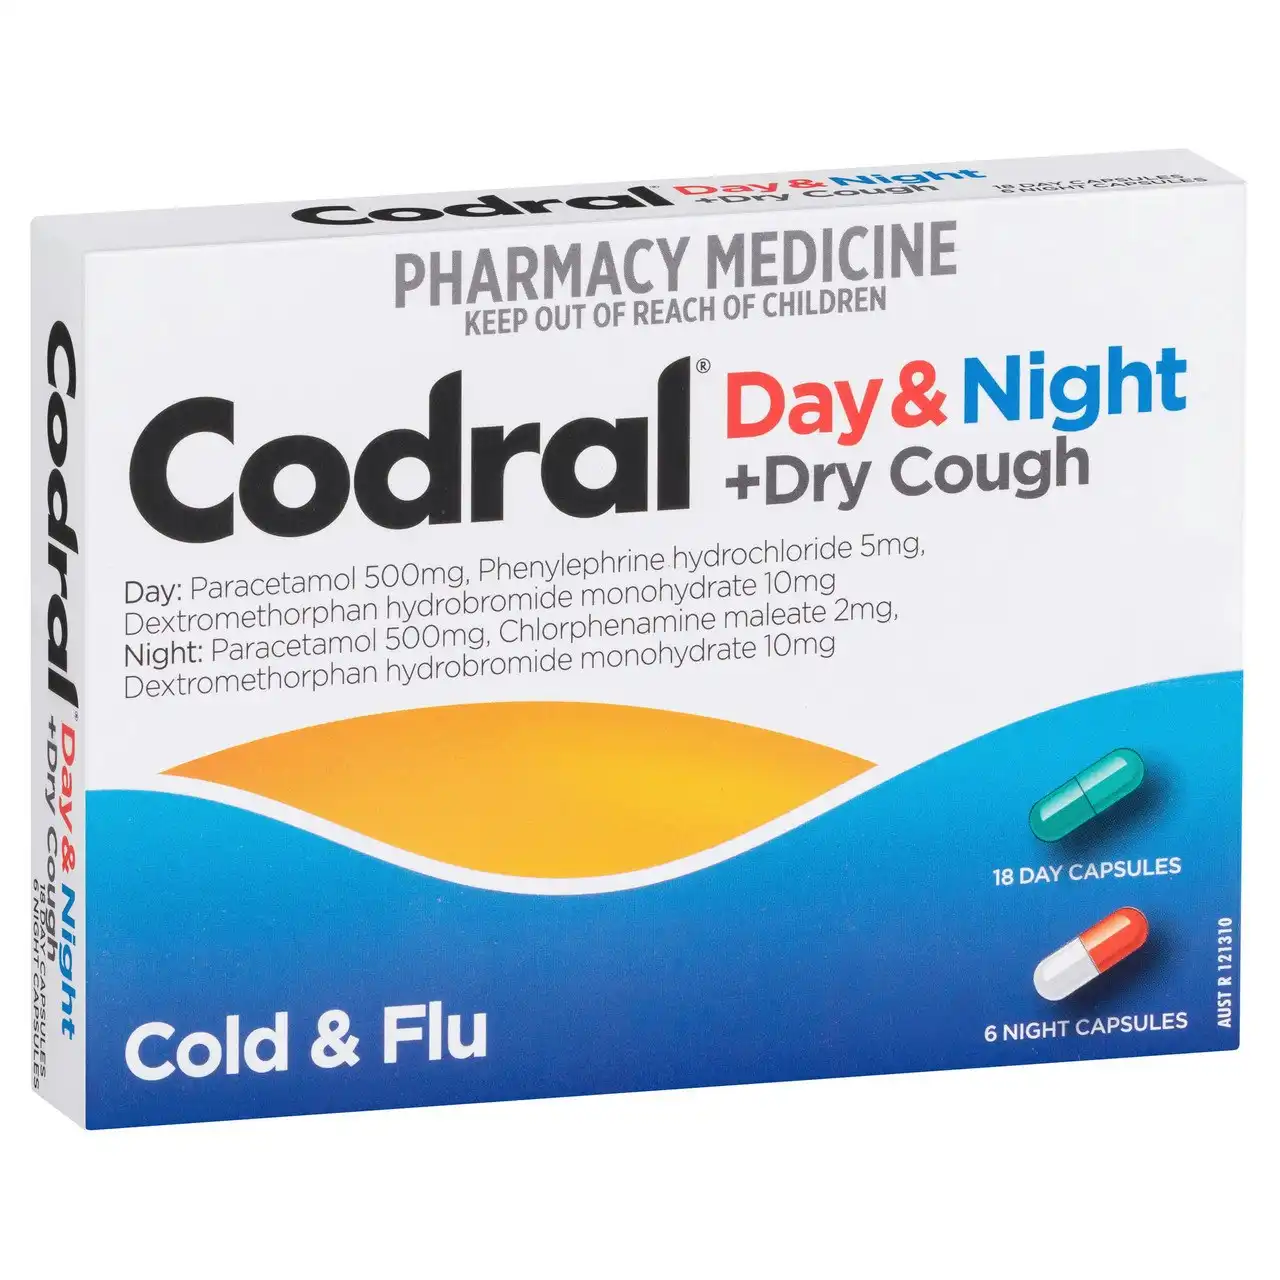 CODRAL Day & Night + Dry Cough Cold & Flu Capsules 24 Pack